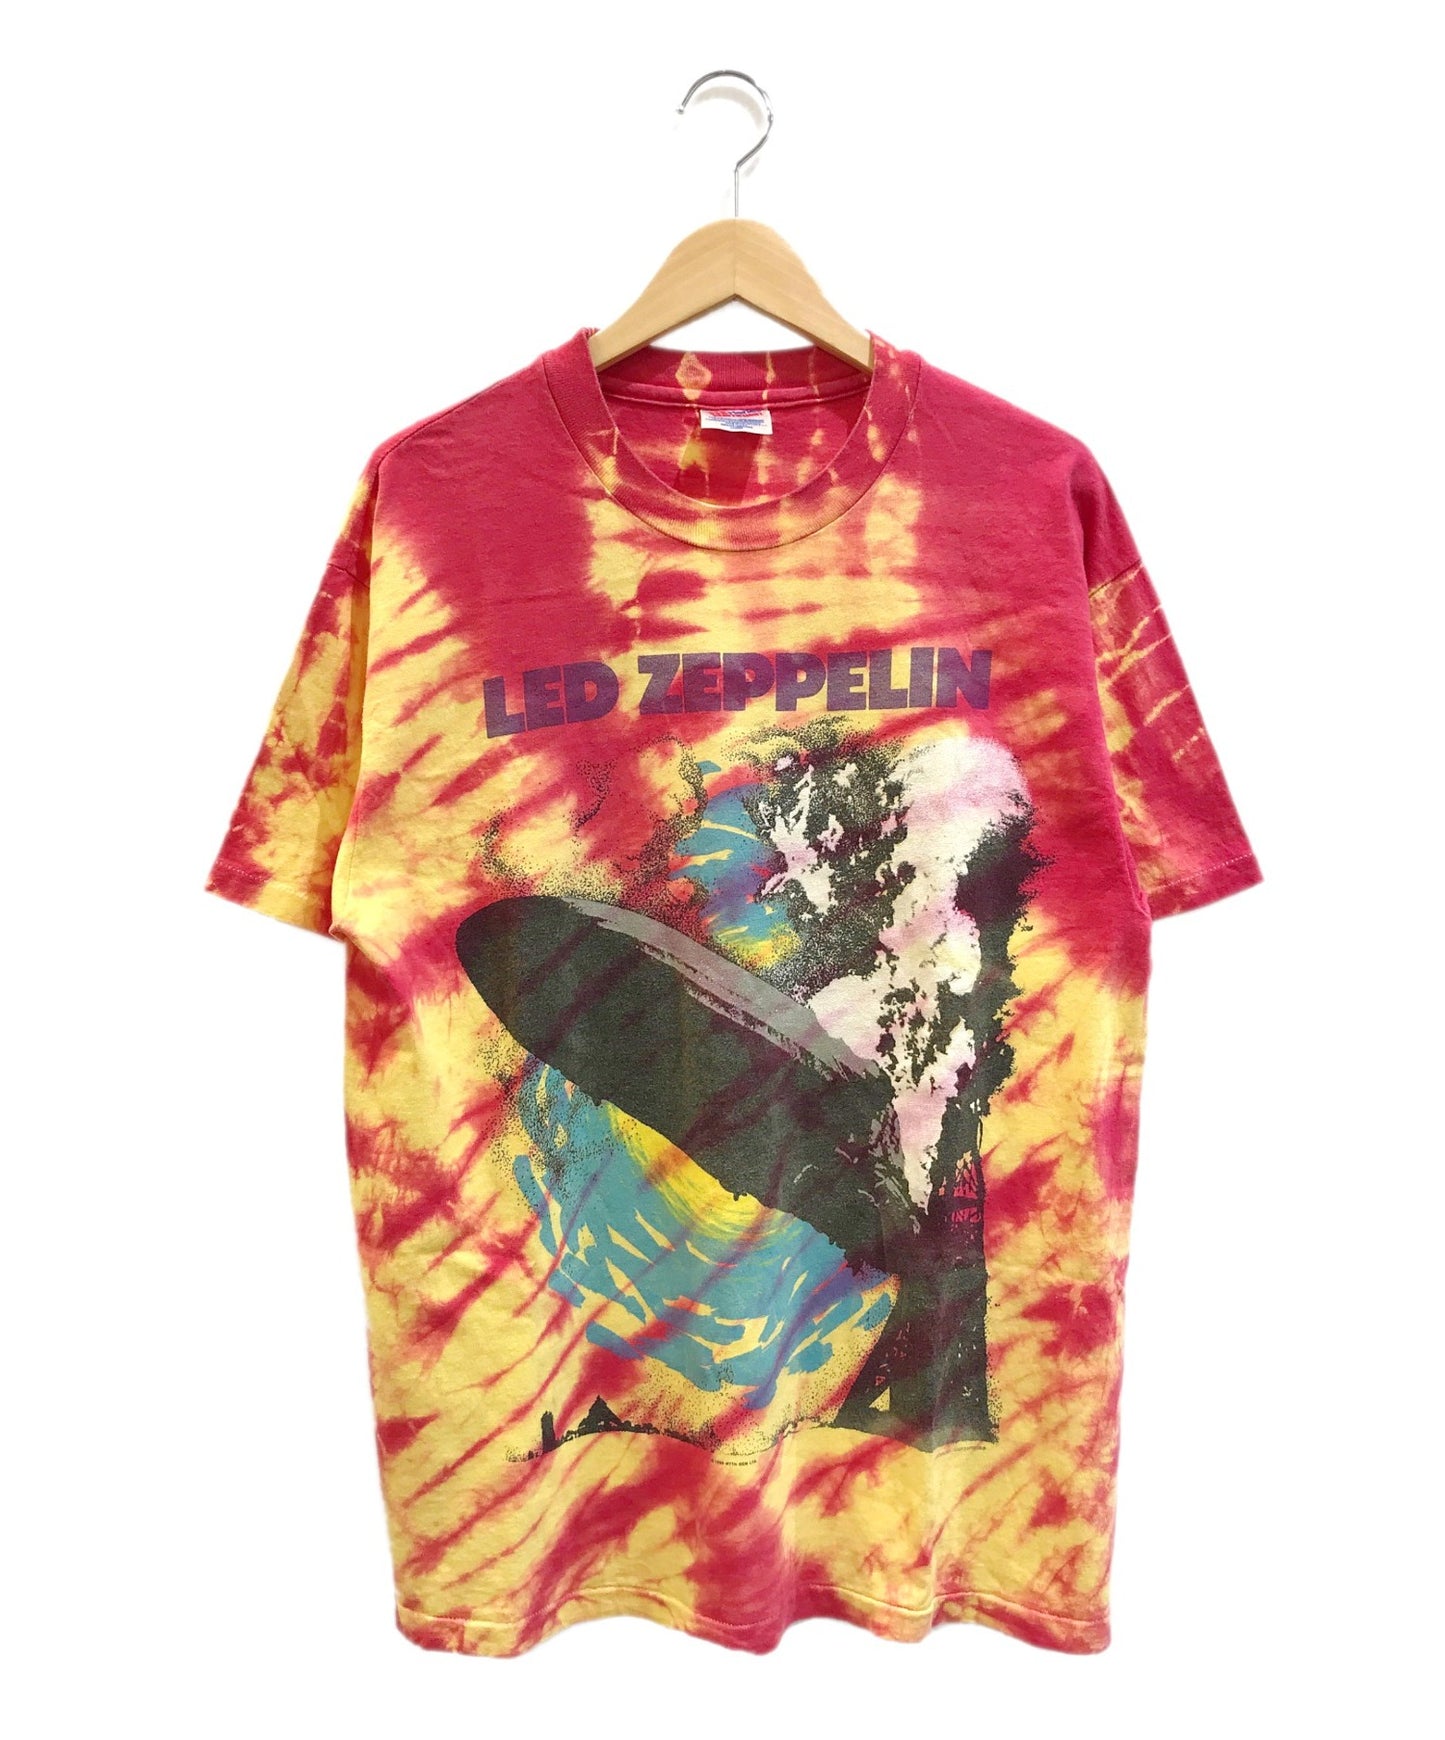 [Pre-owned] [Vintage Clothes] 90's LED ZEPPELIN Band T-Shirt